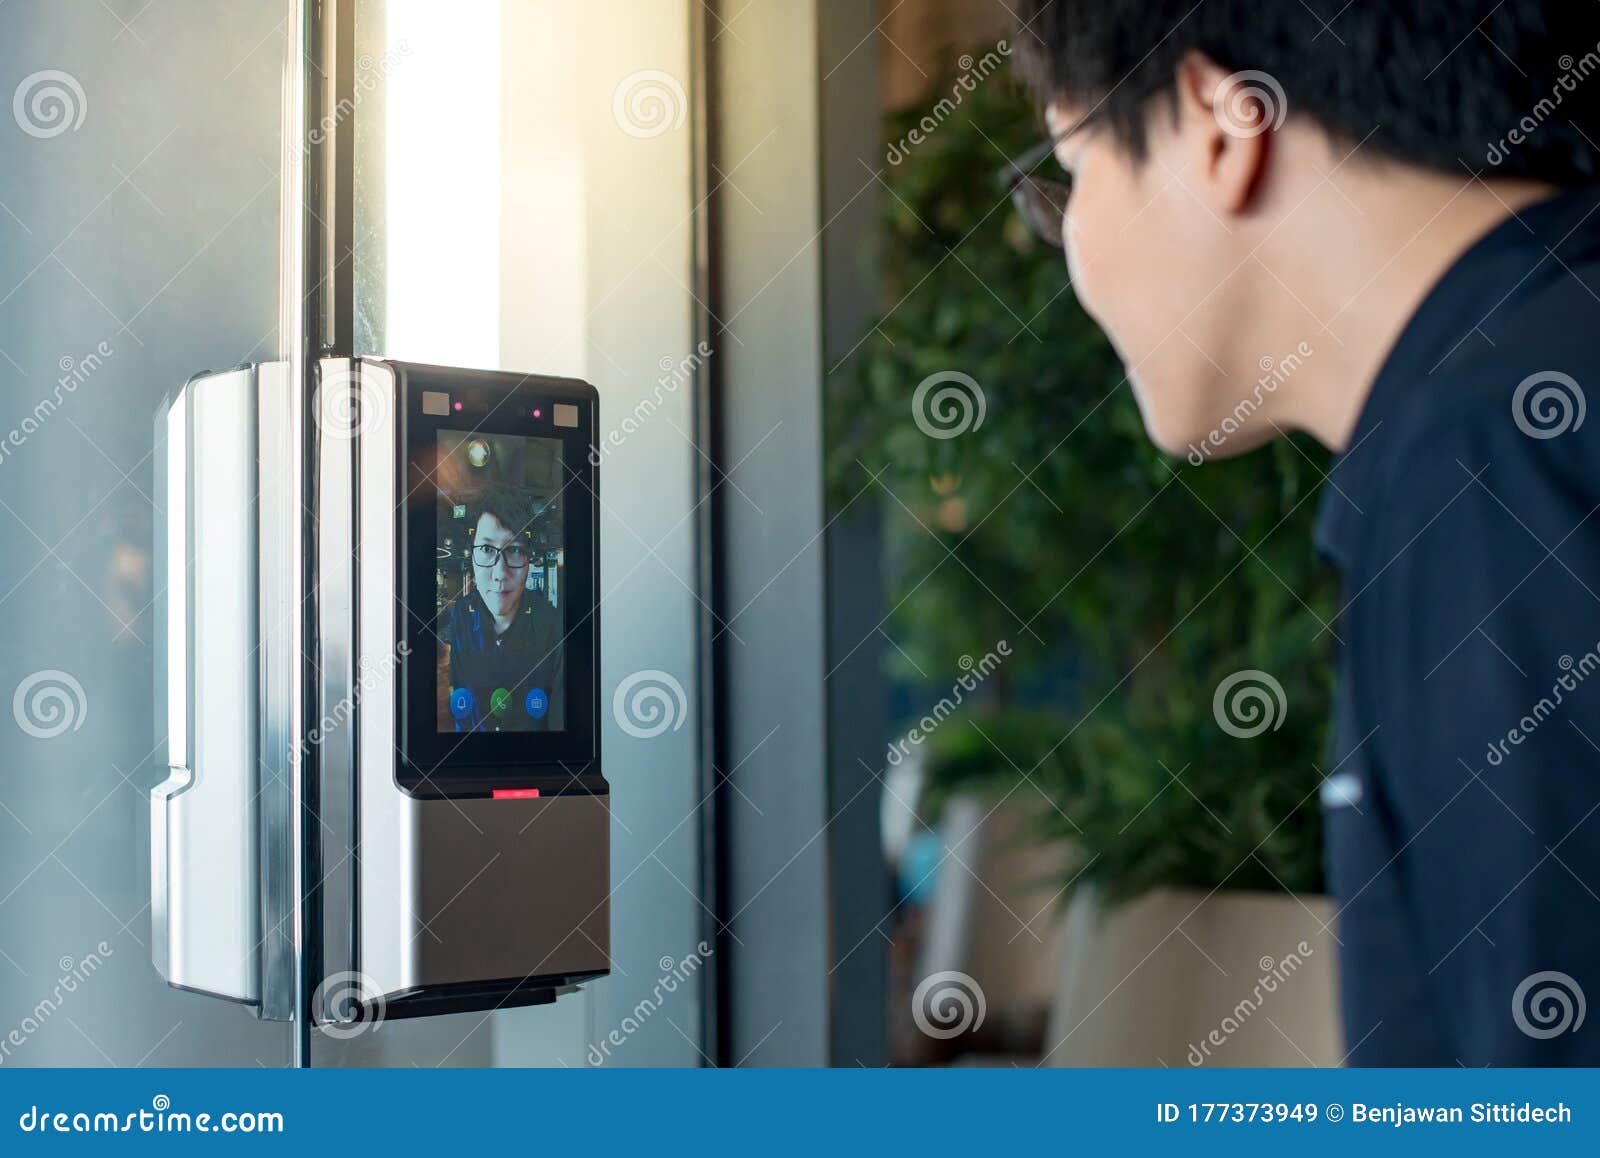 authentication by facial recognition. biometric security system